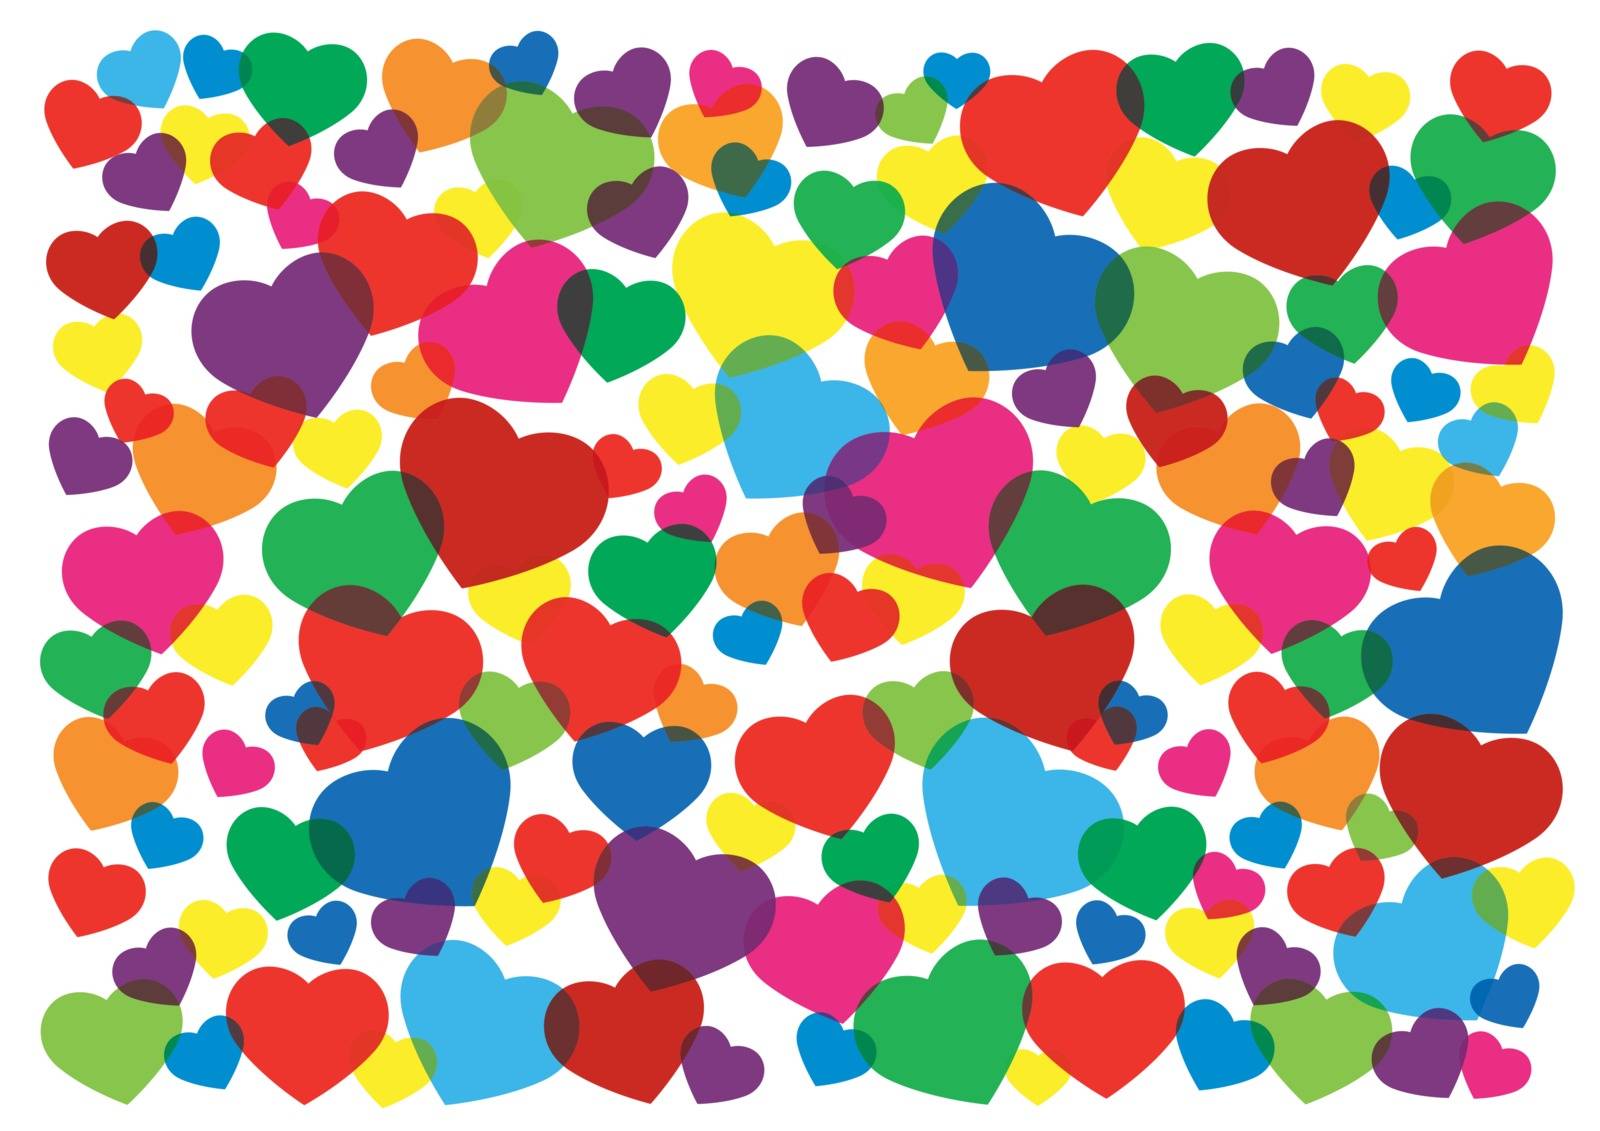 colorful hearts background vector illustration by h-santima